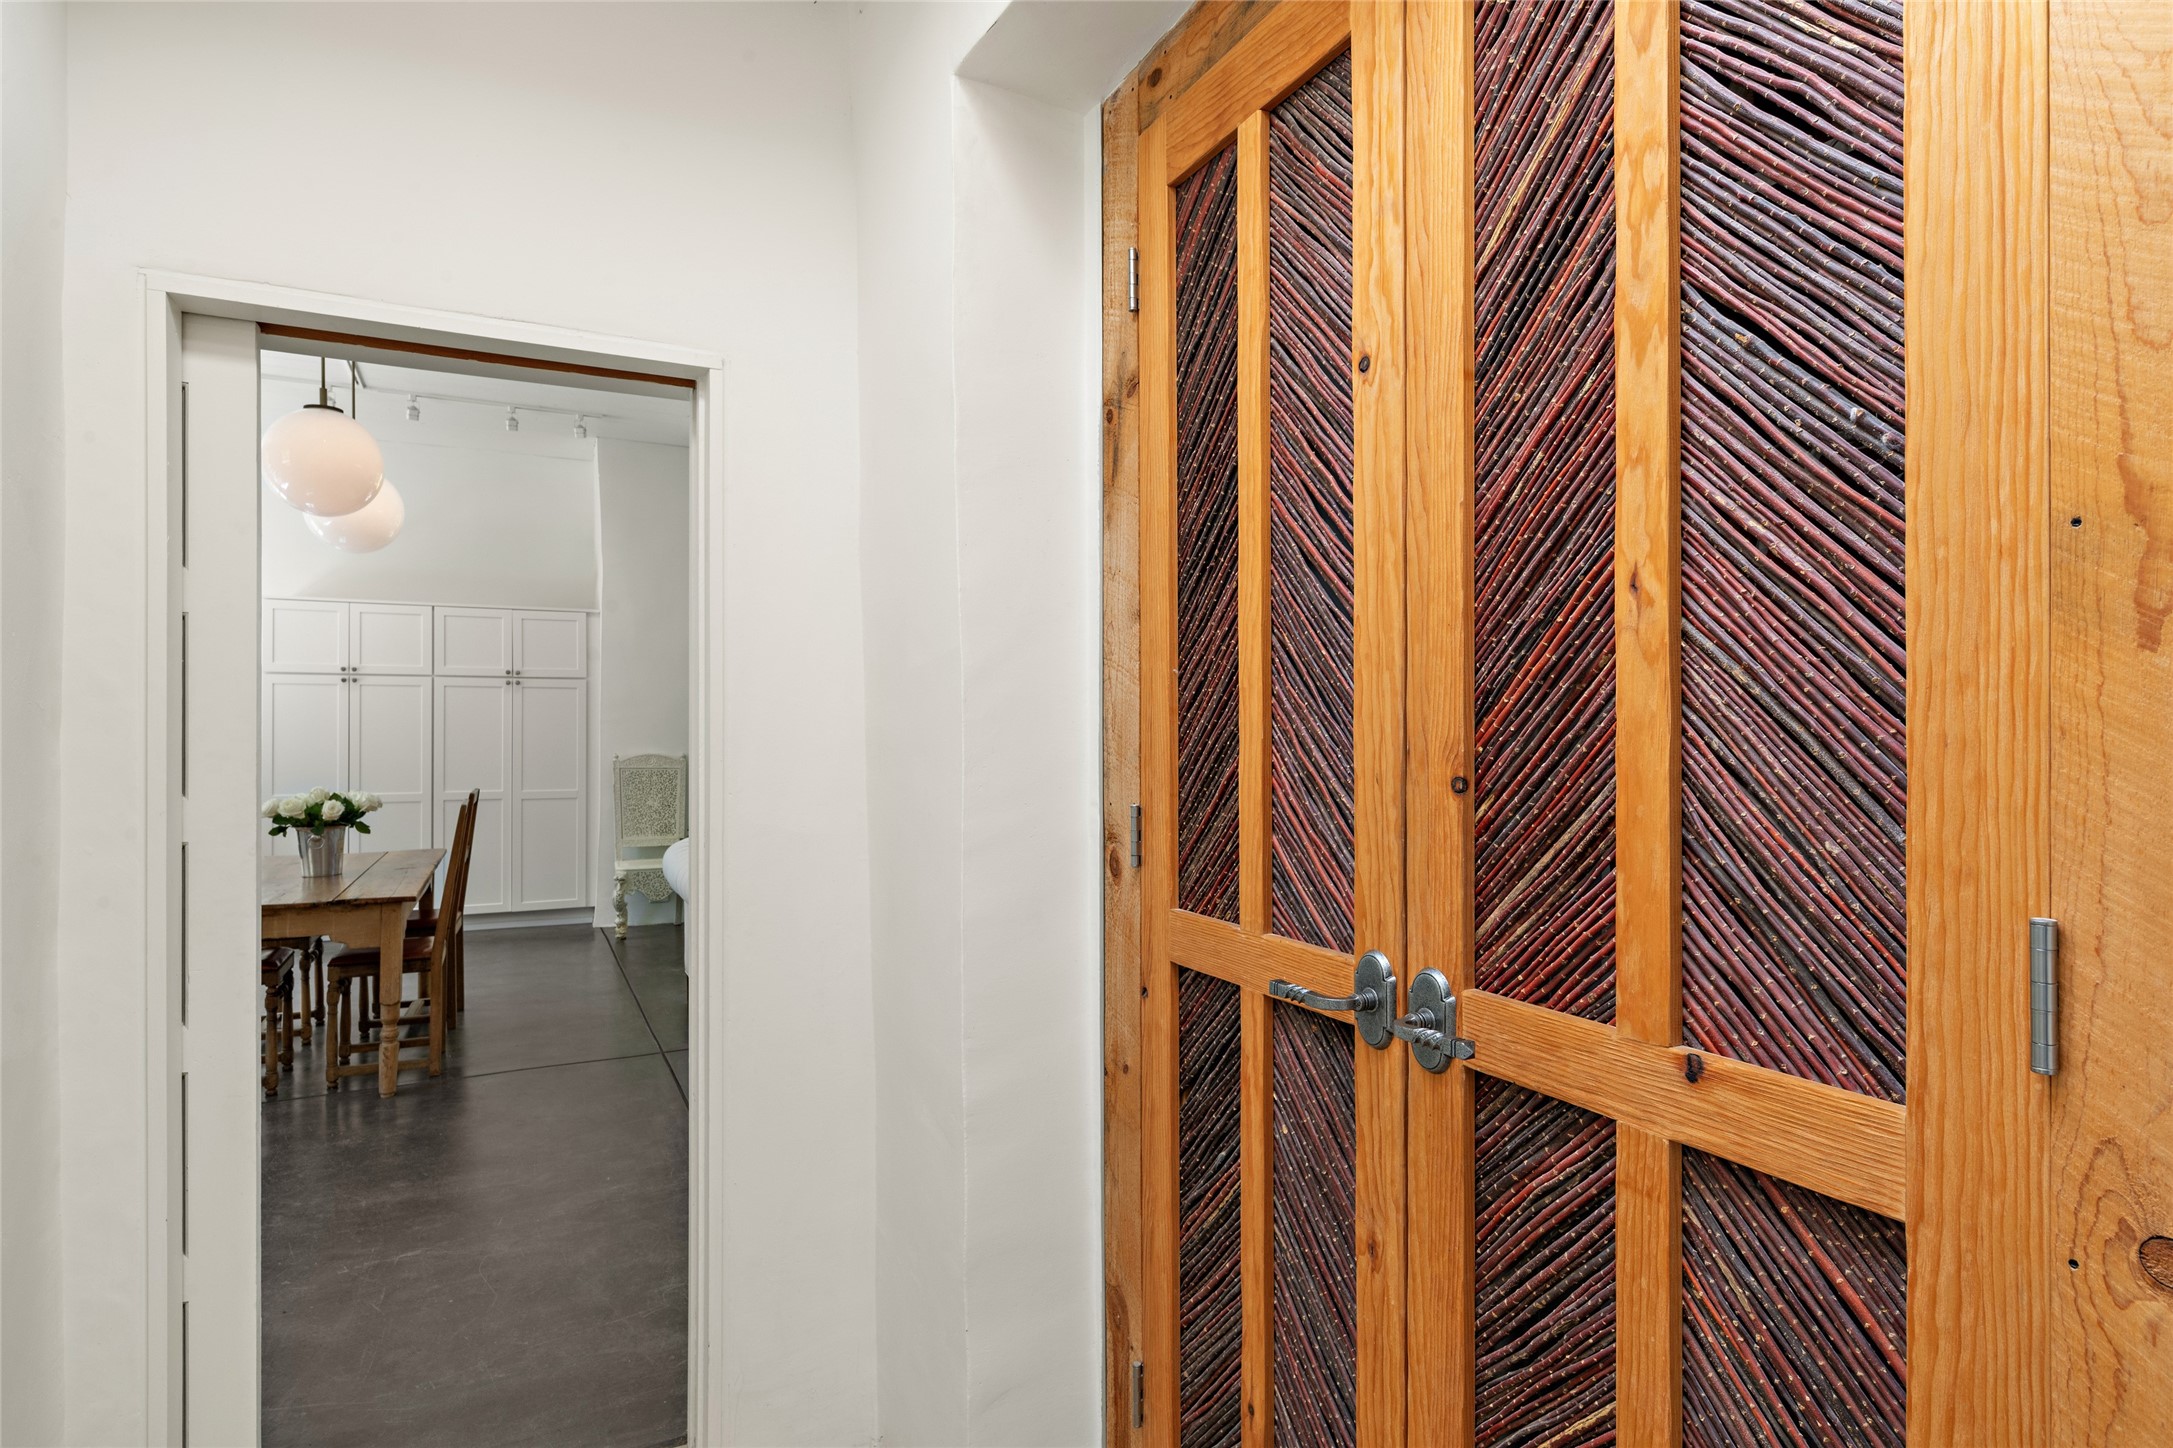 Hand crafted Red willow closet doors in hallway..